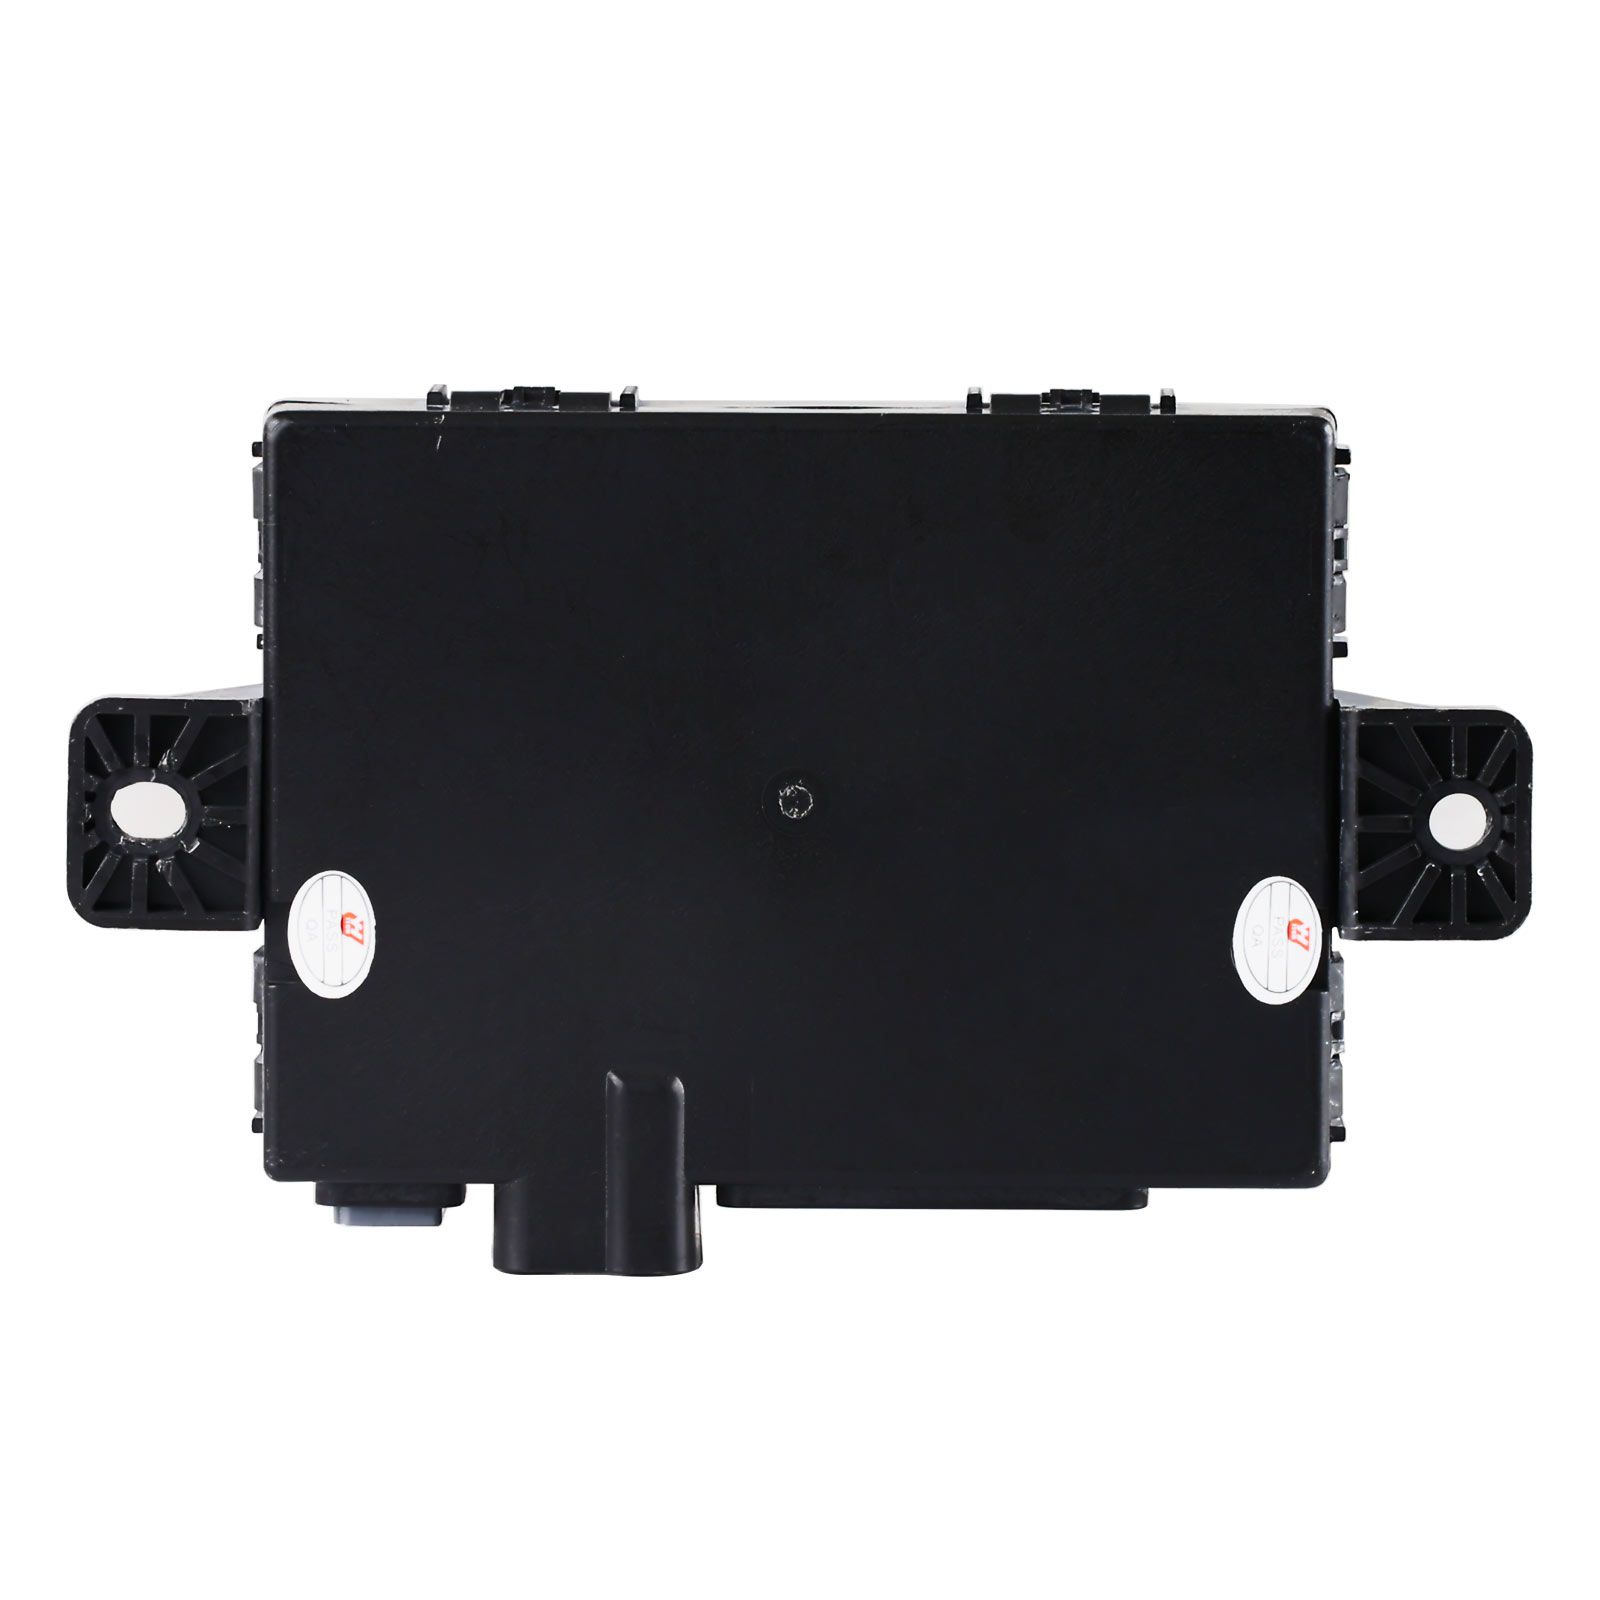 OEM Jaguar Land Rover Keyless Entry Control Module RFA Module JPLA with Comfort Access contains SPC560B Chip and Data